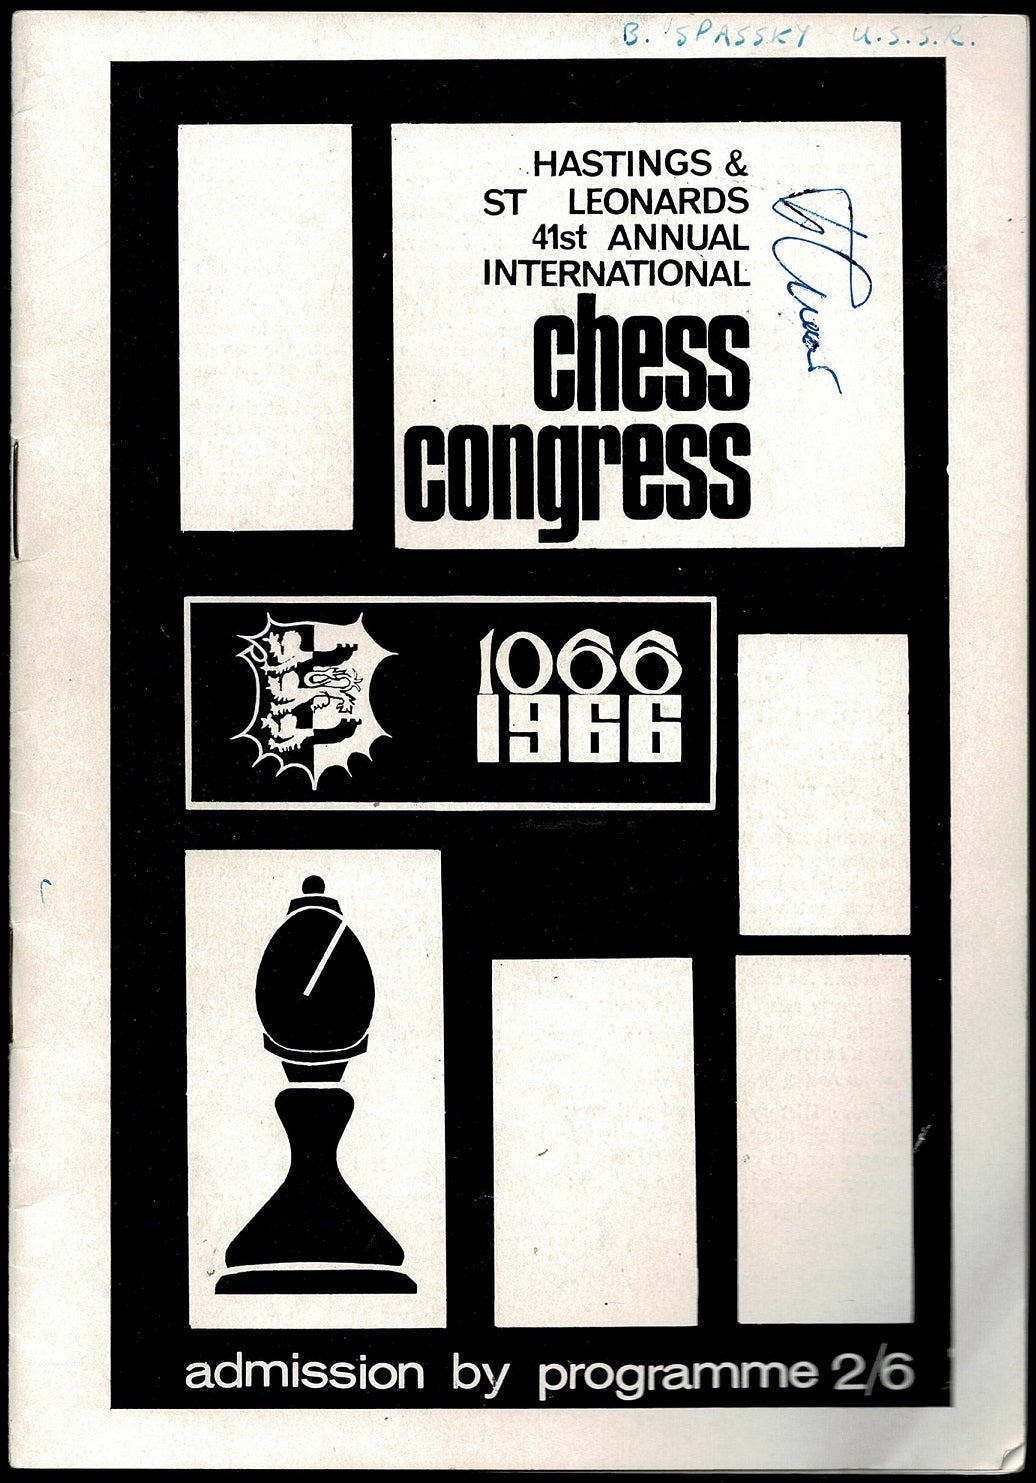 Hastings and St Leonards 41st Annual International Chess Congress Programme